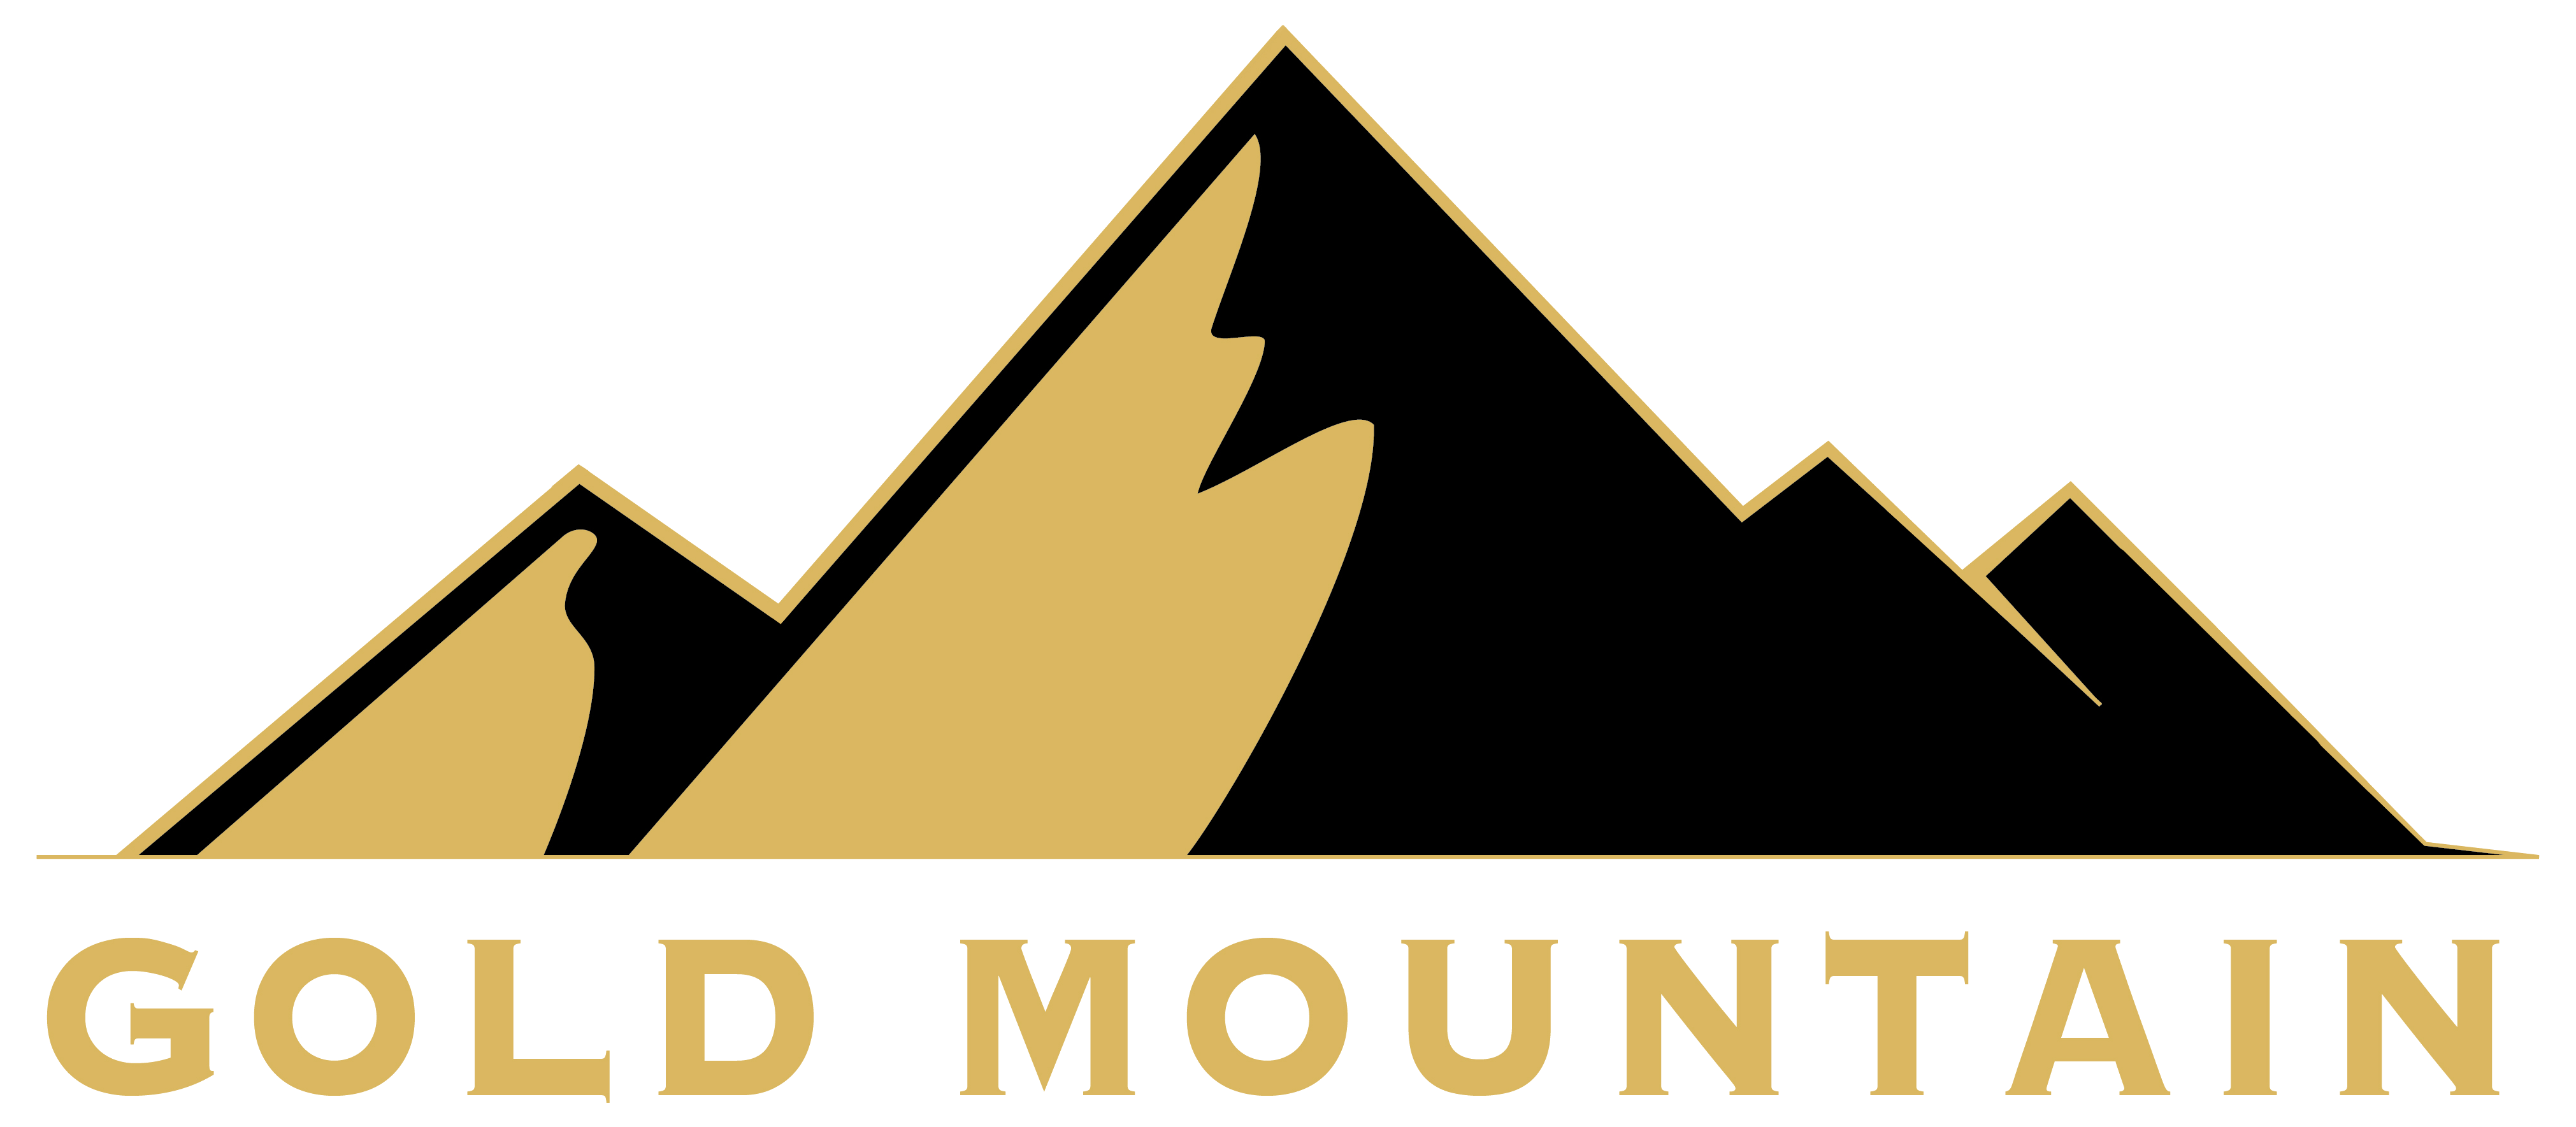 Gold Mountain Mining Corp, Thursday, February 18, 2021, Press release picture